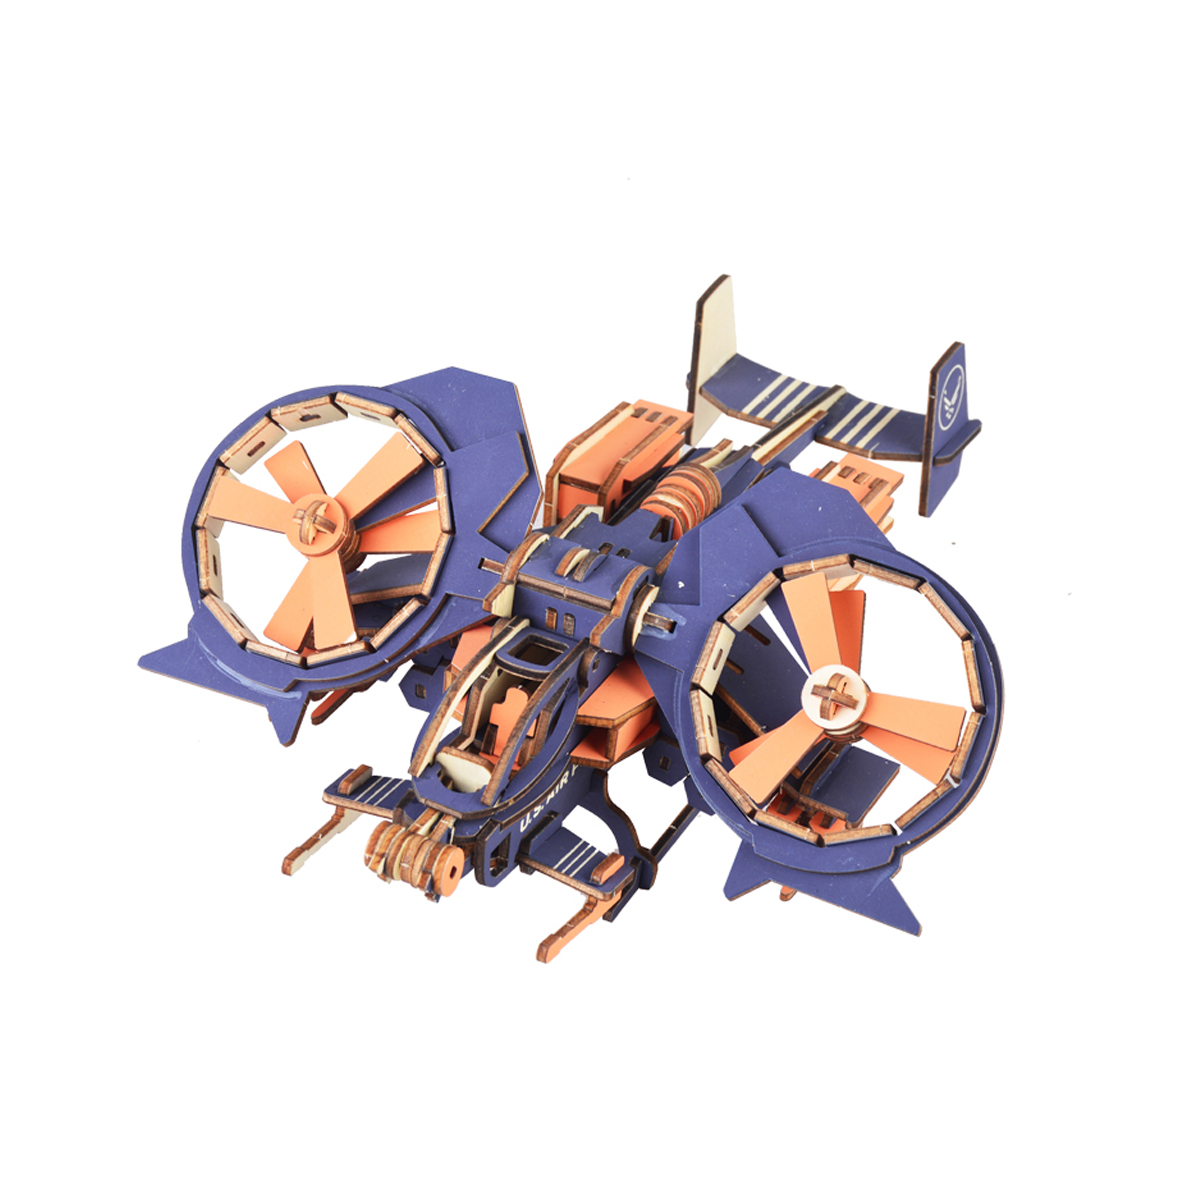 3D-Woodcraft-Assembly-Western-Fighter-Series-Kit-Jigsaw-Puzzle-Decoration-Toy-Model-for-Kids-Gift-1632732-9